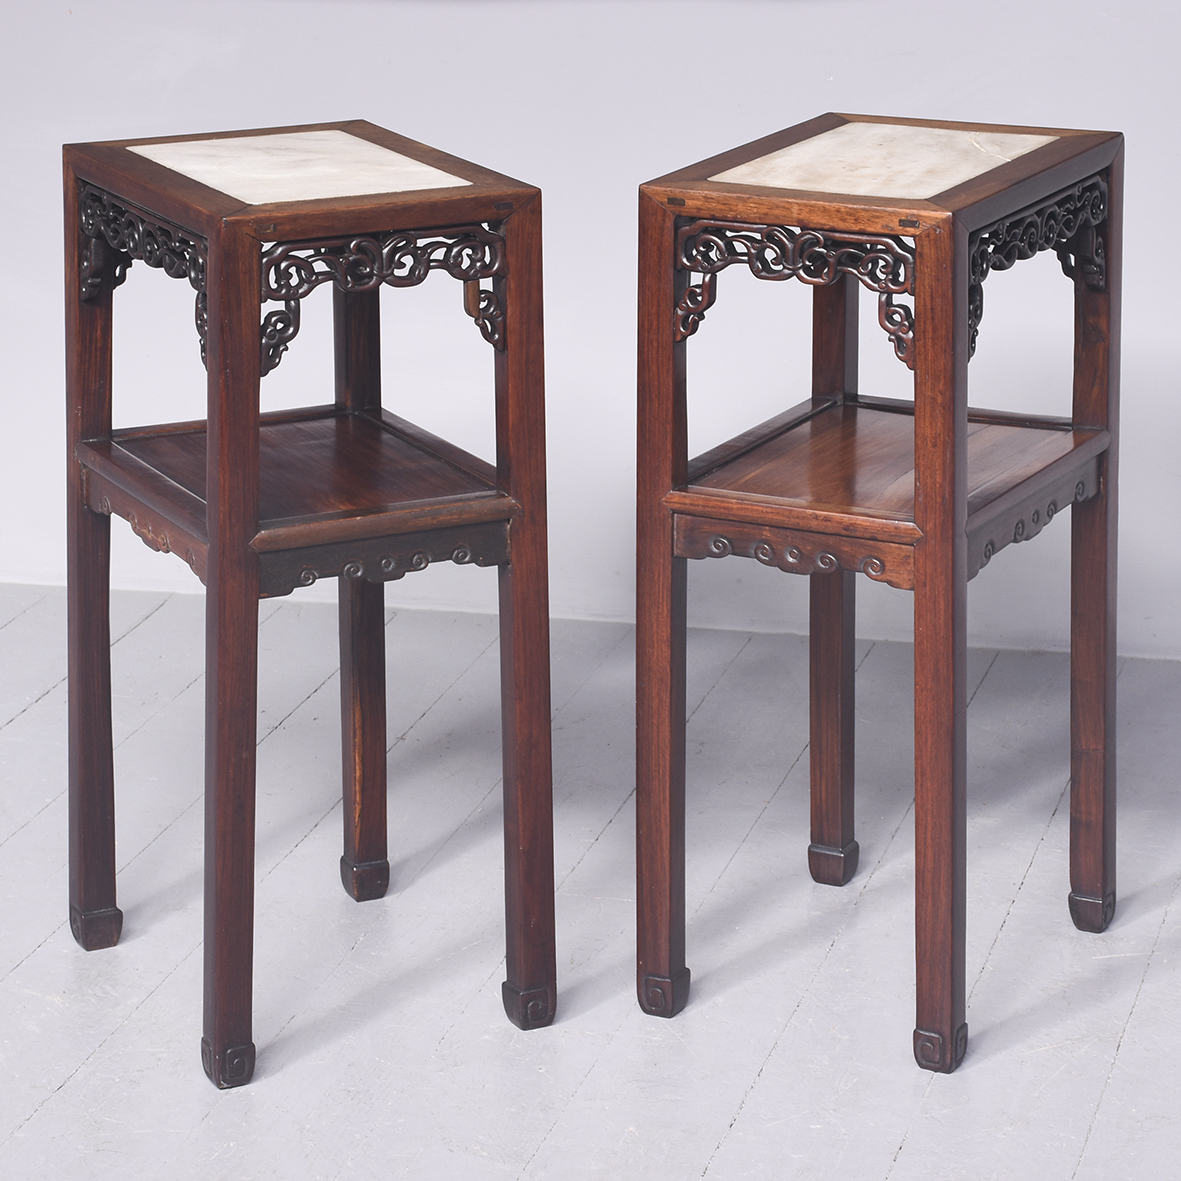 Pair of Hongmu Marble Inset Chinese Lampstands or Side Tables 19th century Antique Tables